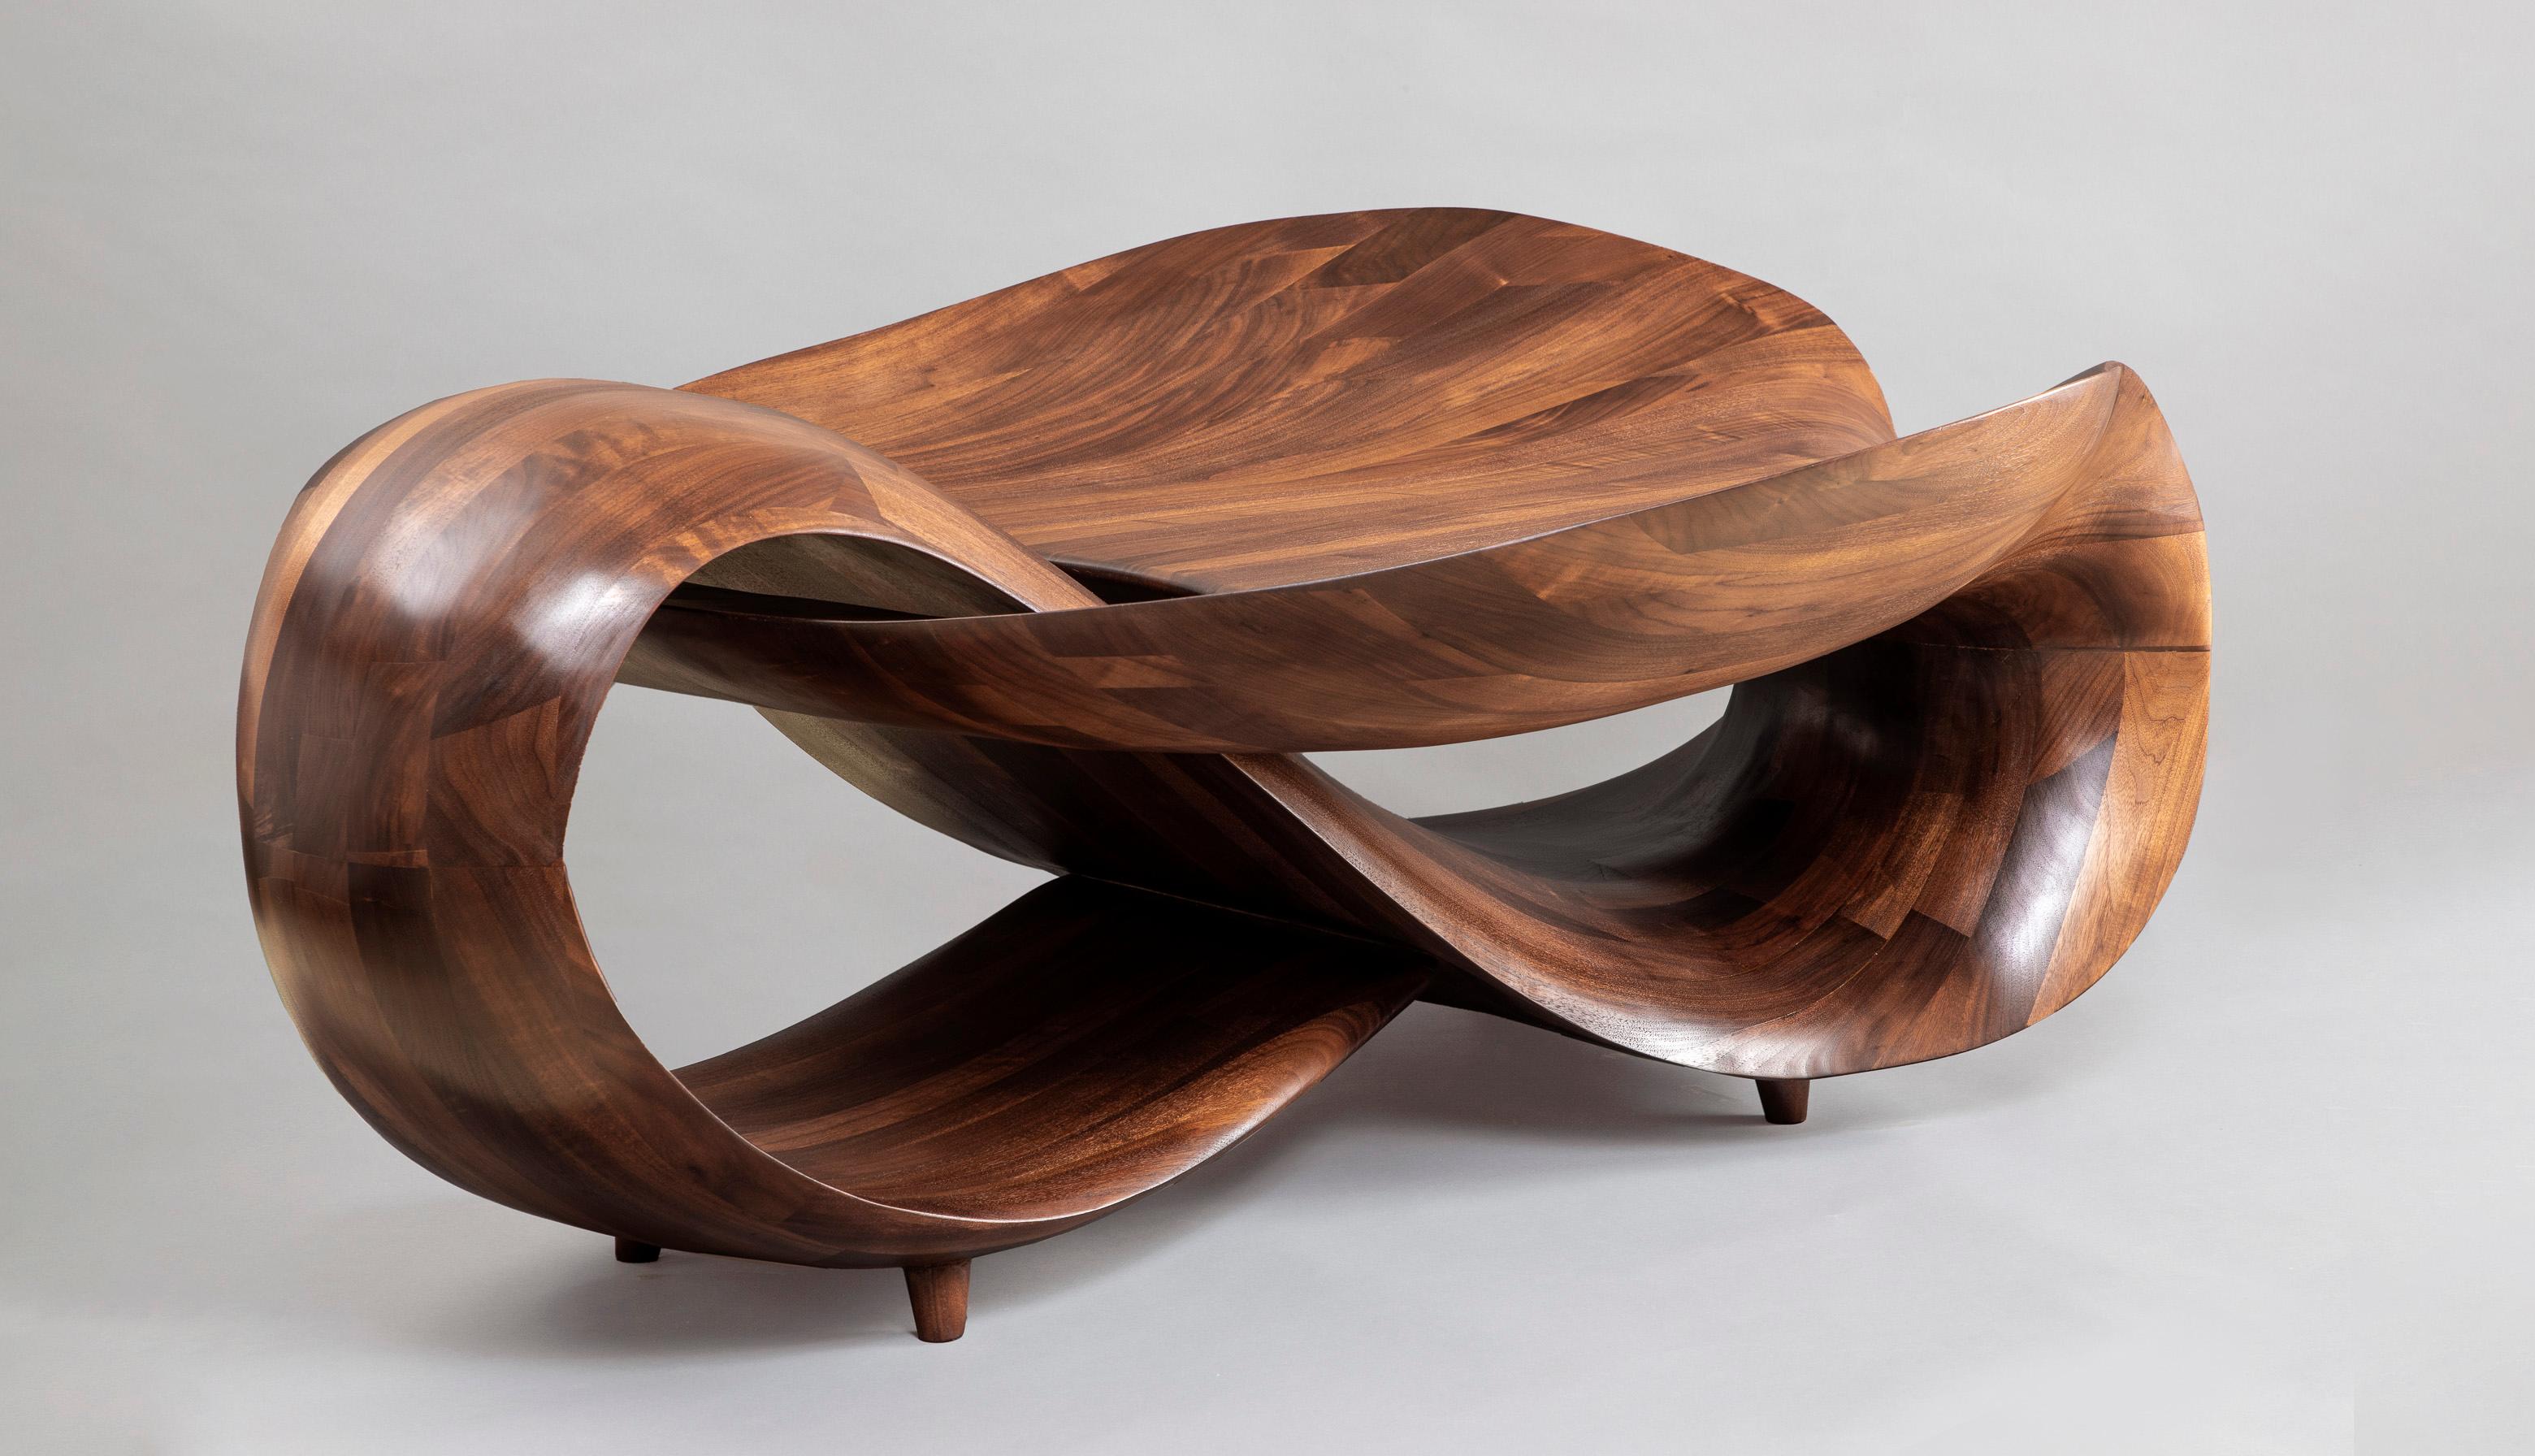 Sculptural coffee table by Gildas Berthelot
Exclusivity of Galerie Philia
Title: Quoi l’éternité ? 
Limited Edition of 3
Material: Solid black walnut
Dimensions: W 170 x D 120 x H 64 cm.


Gildas Berthelot has forged for more than 30 years a